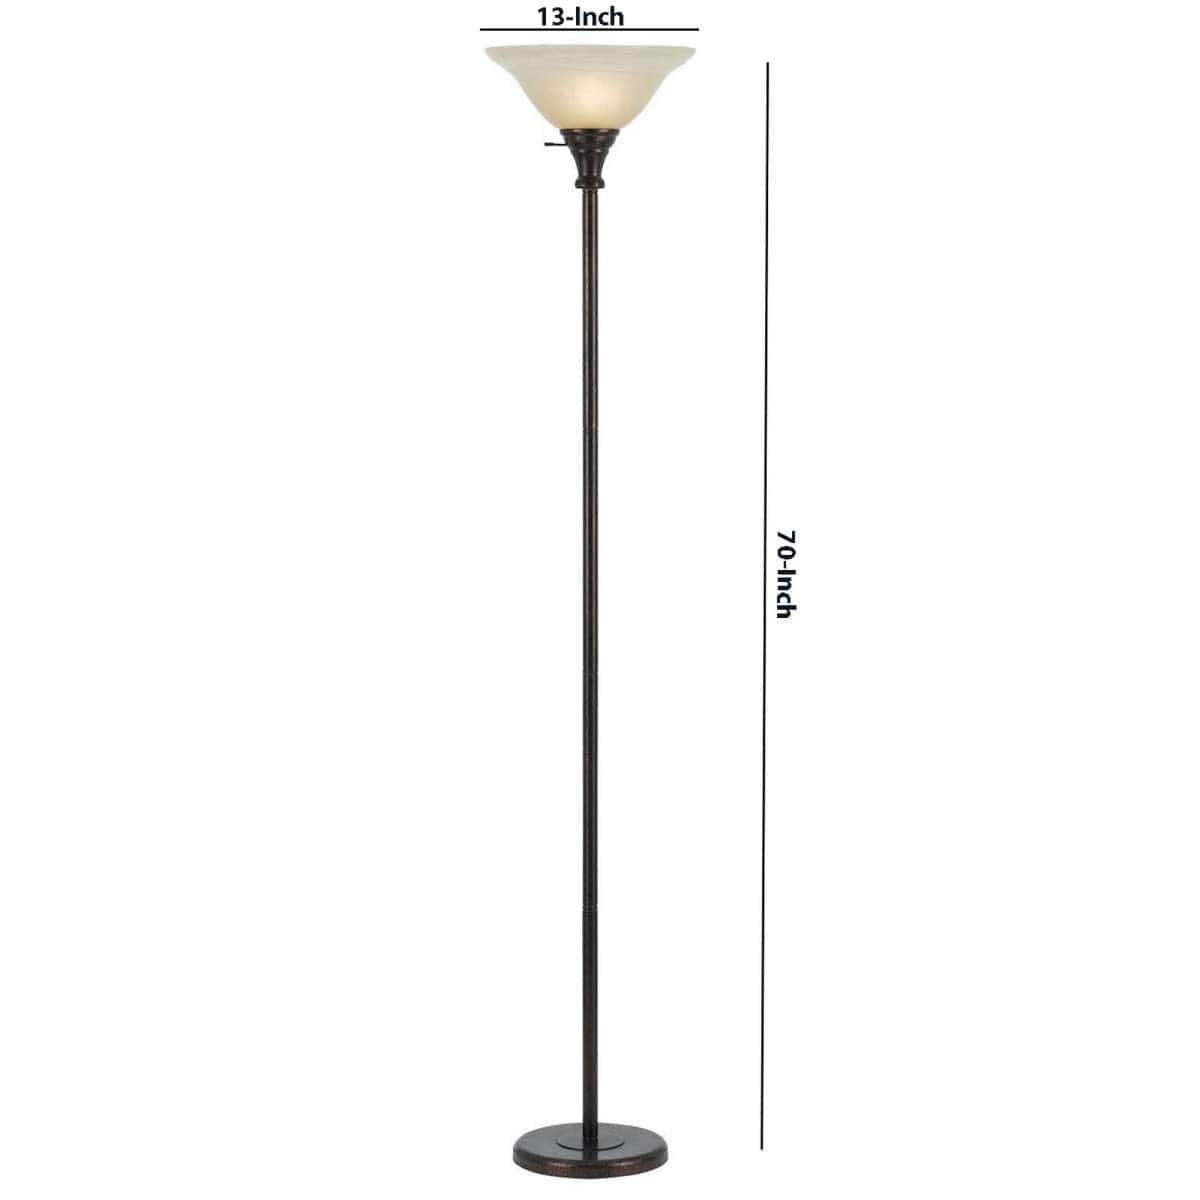 Benzara Metal Round 3 Way Torchiere Lamp With Frosted Glass Shade, Bronze And Gold By Benzara Floor Lamps BM225119